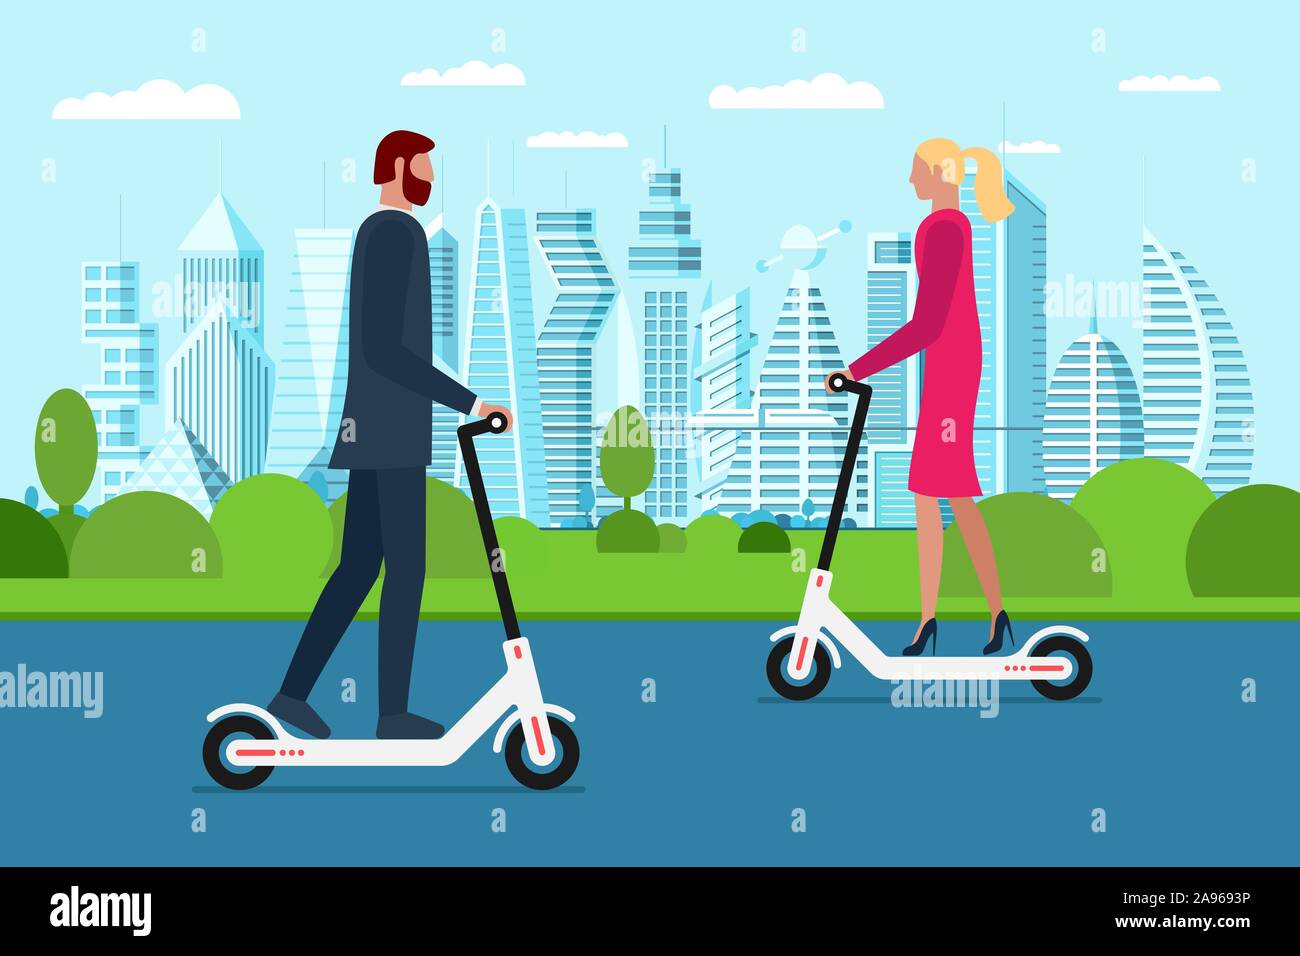 Hipster business man and woman riding electric scooters in future